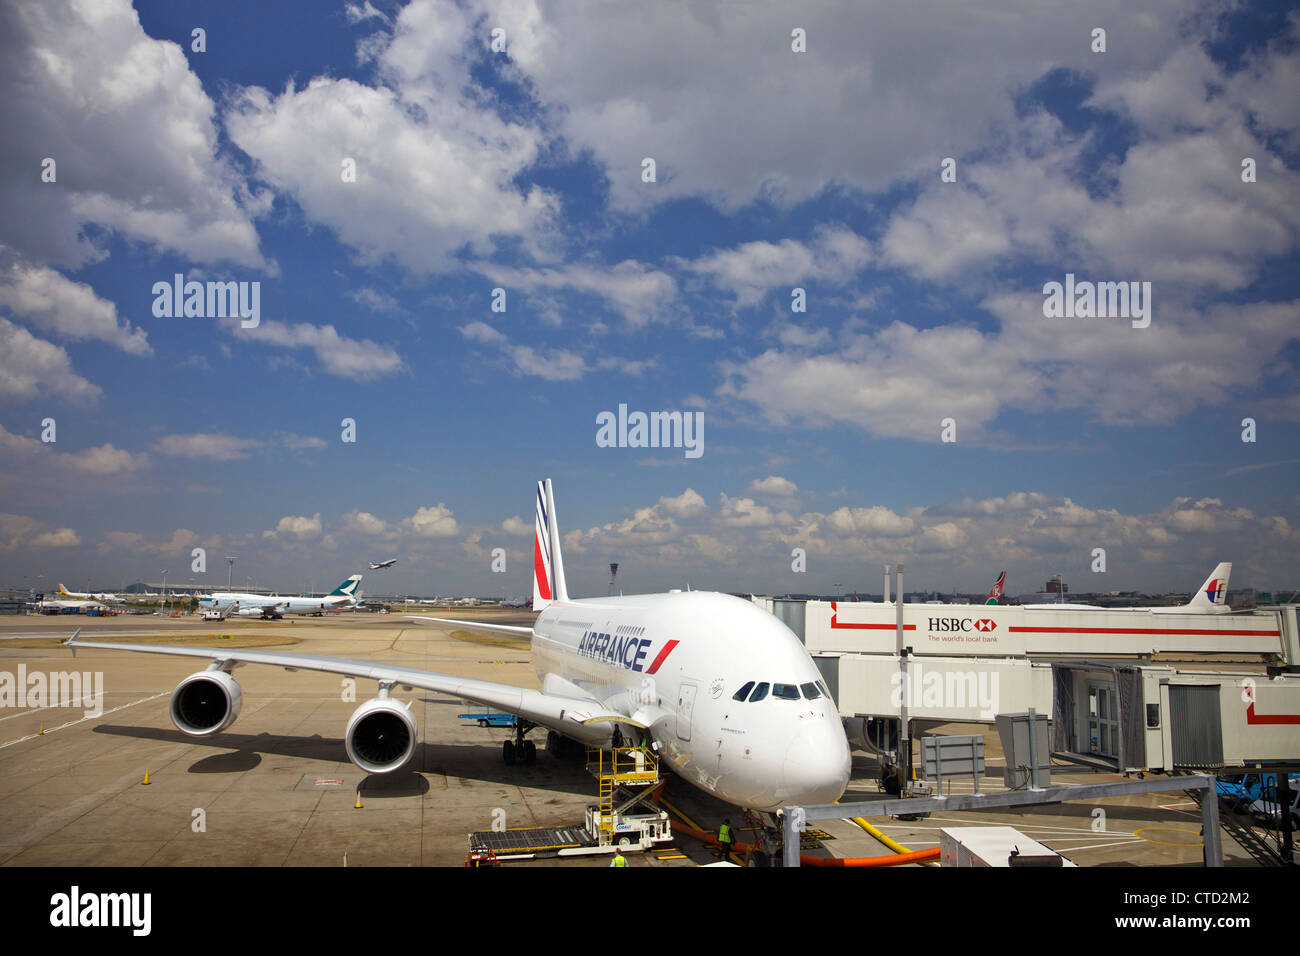 Air France Airbus A380 standing outside Terminal 4, Heathrow Airport, London, England, UK, United Kingdom, GB, Stock Photo